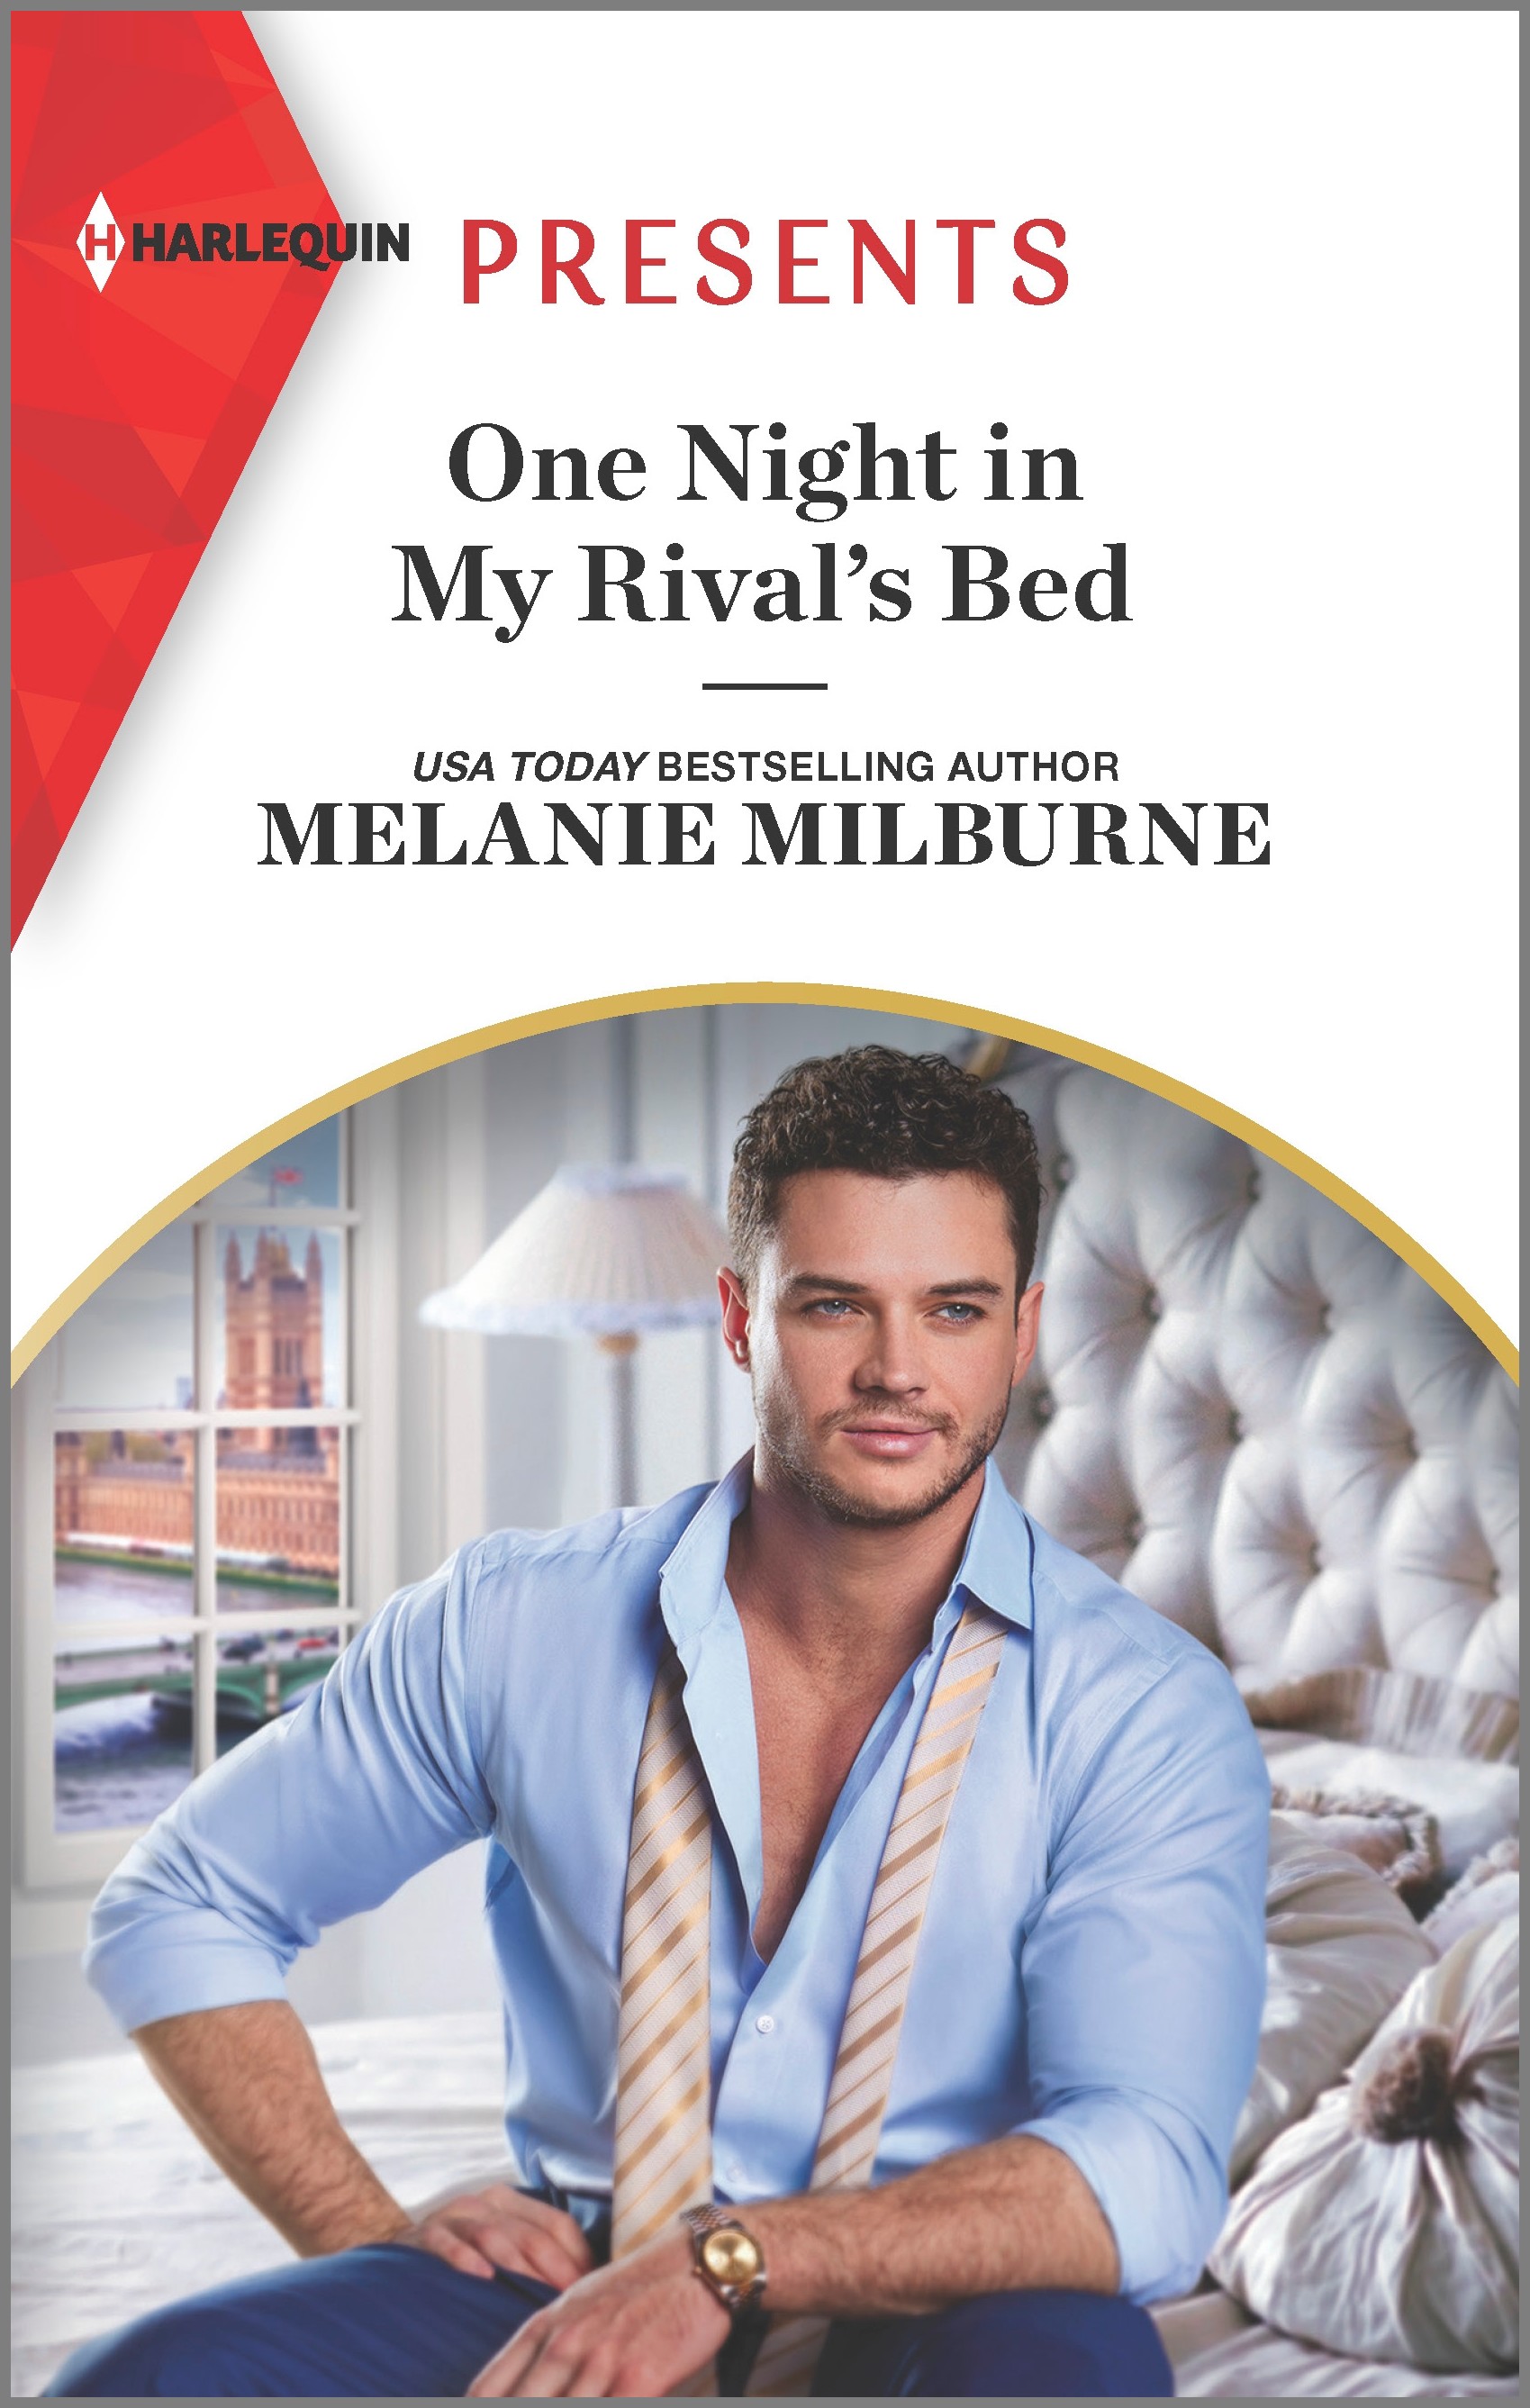 Cover image for ONE NIGHT IN MY RIVAL'S BED by Melanie Milburne, featuring a man with his tie unfastened and the first button of his dress shirt undone. He is sitting on a large white bed.